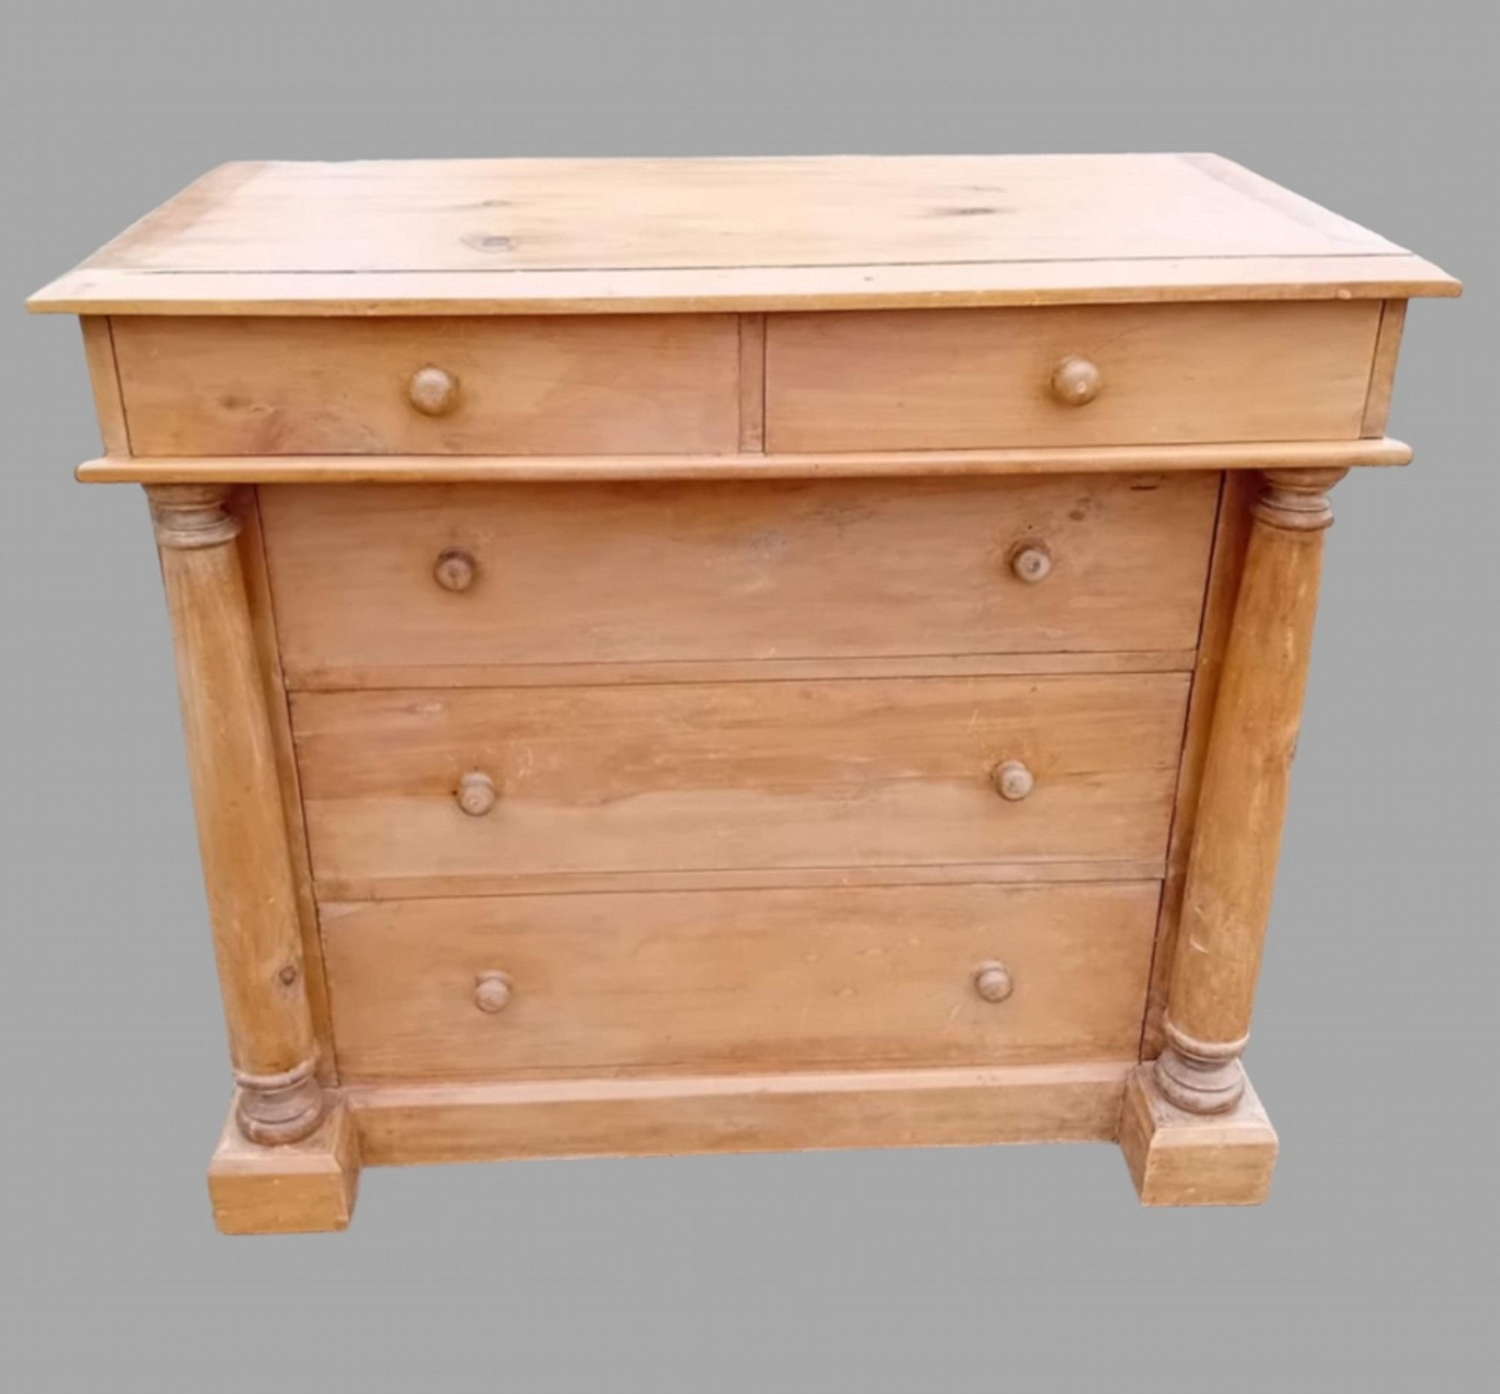 A c1900 Pine Chest Of Drawers